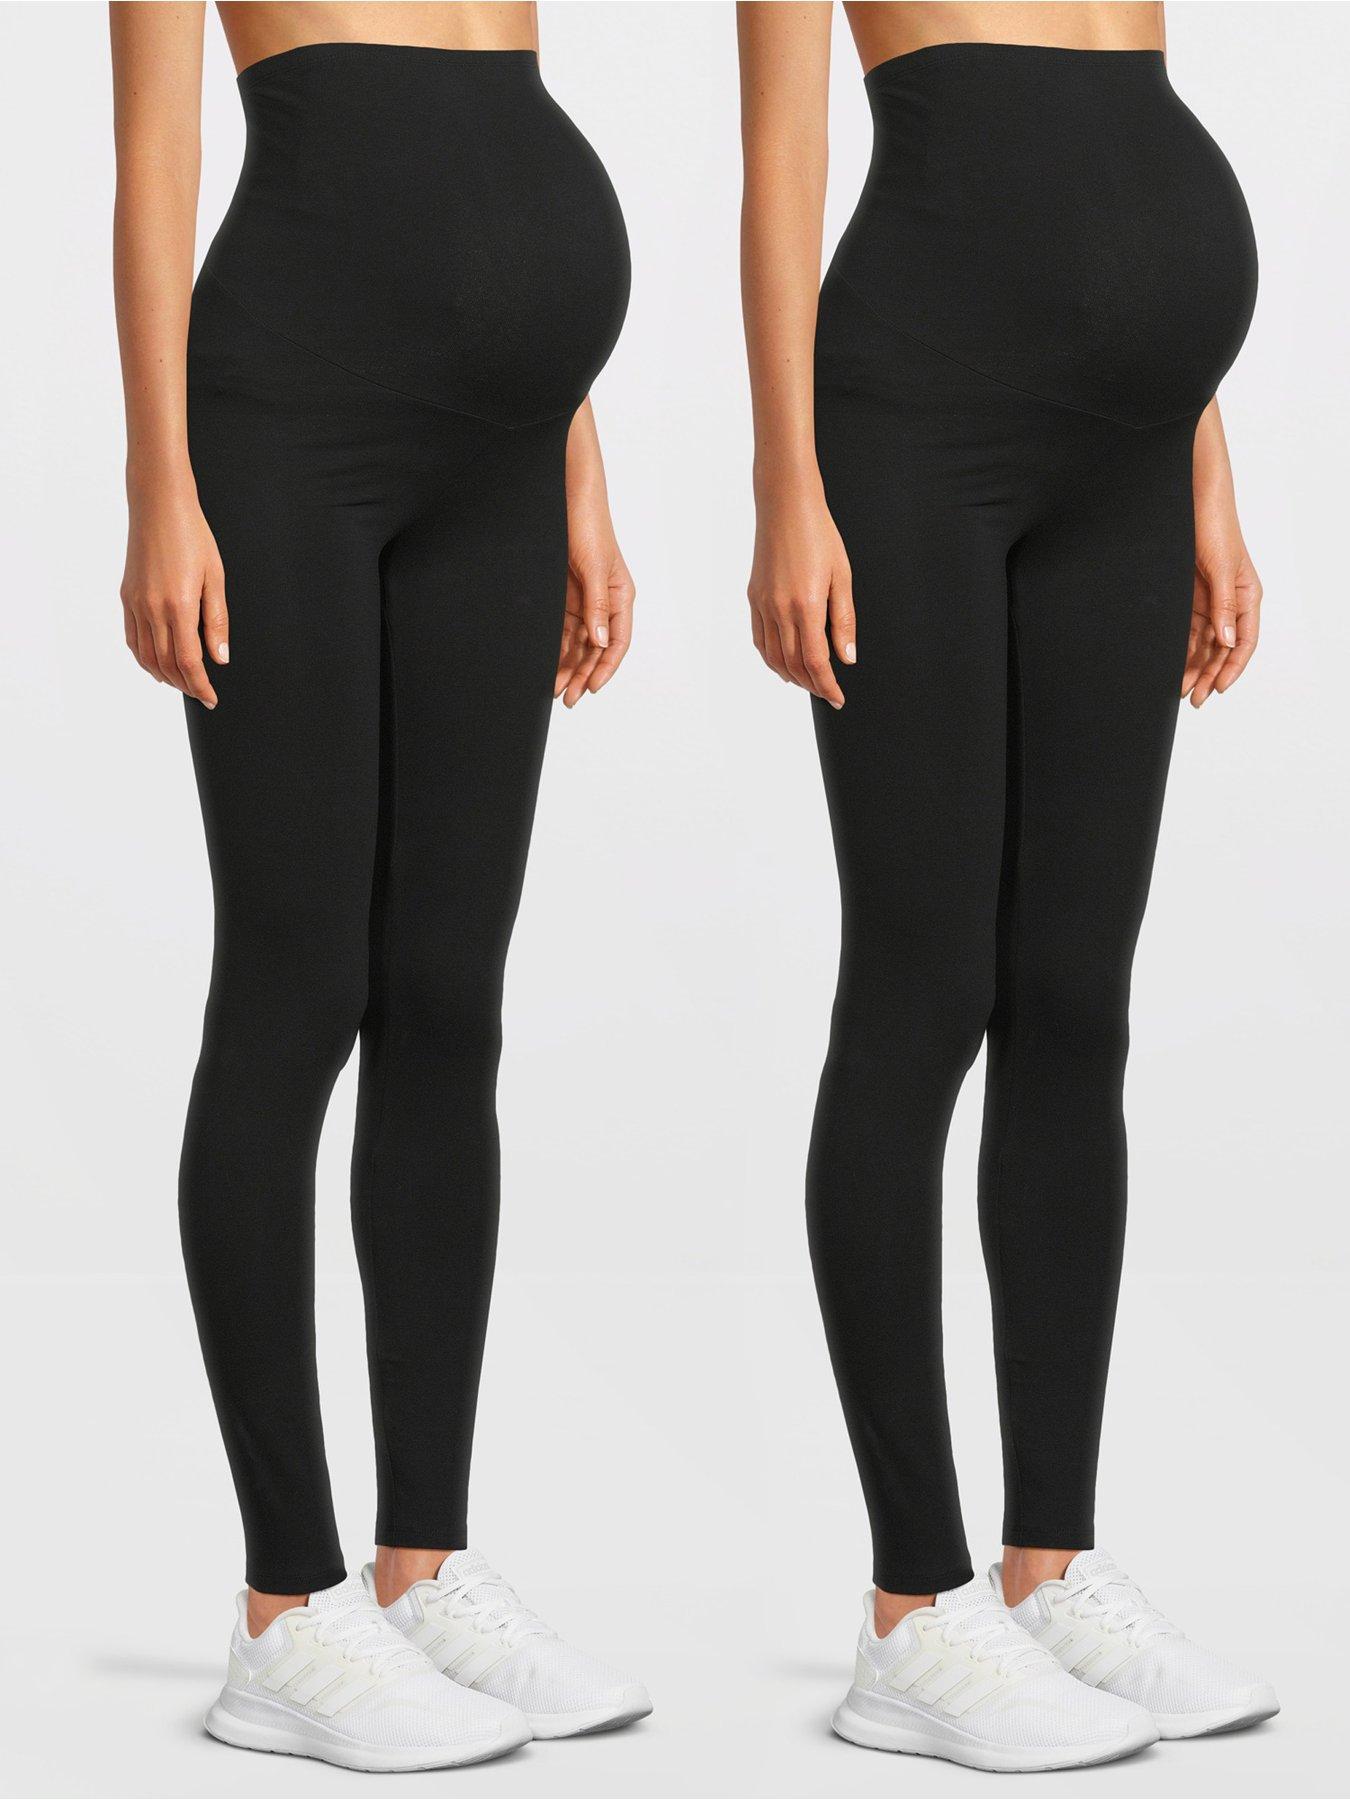 SPANX, Pants & Jumpsuits, Spanx Faux Leather Pebbled High Waisted Leggings  In Black 286r